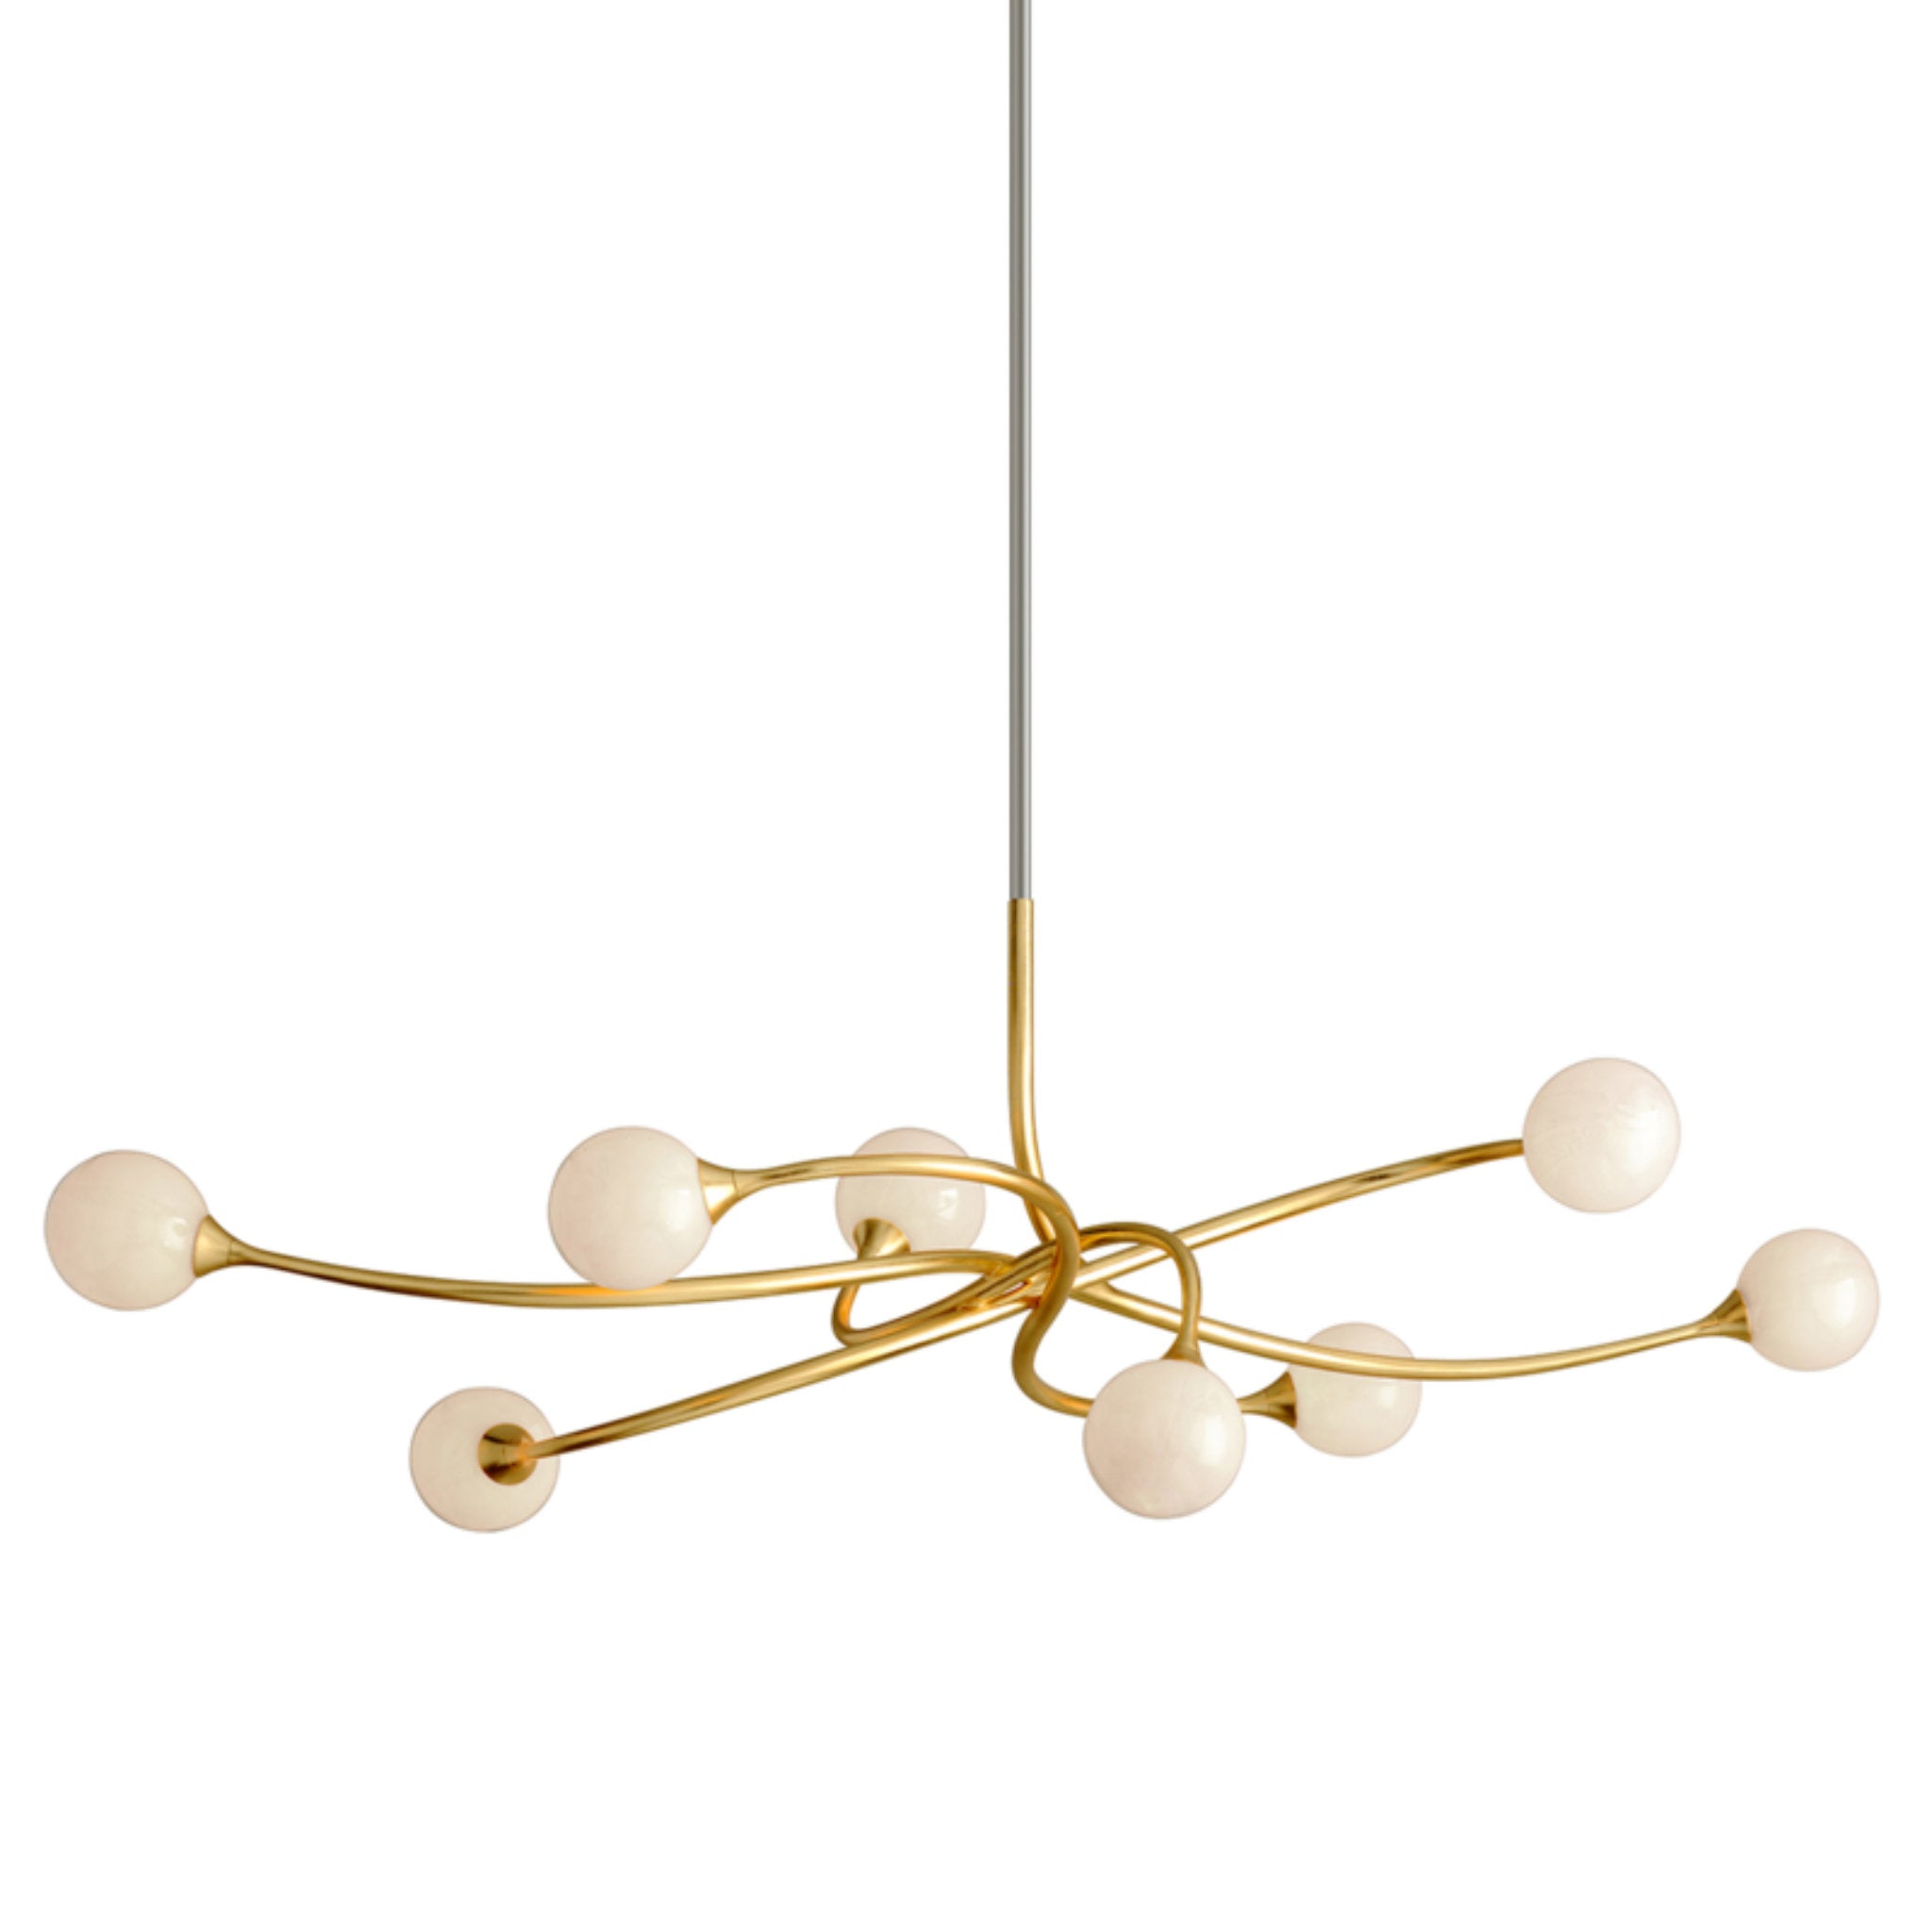 SIGNATURE 8 Light Linear in Gold Leaf